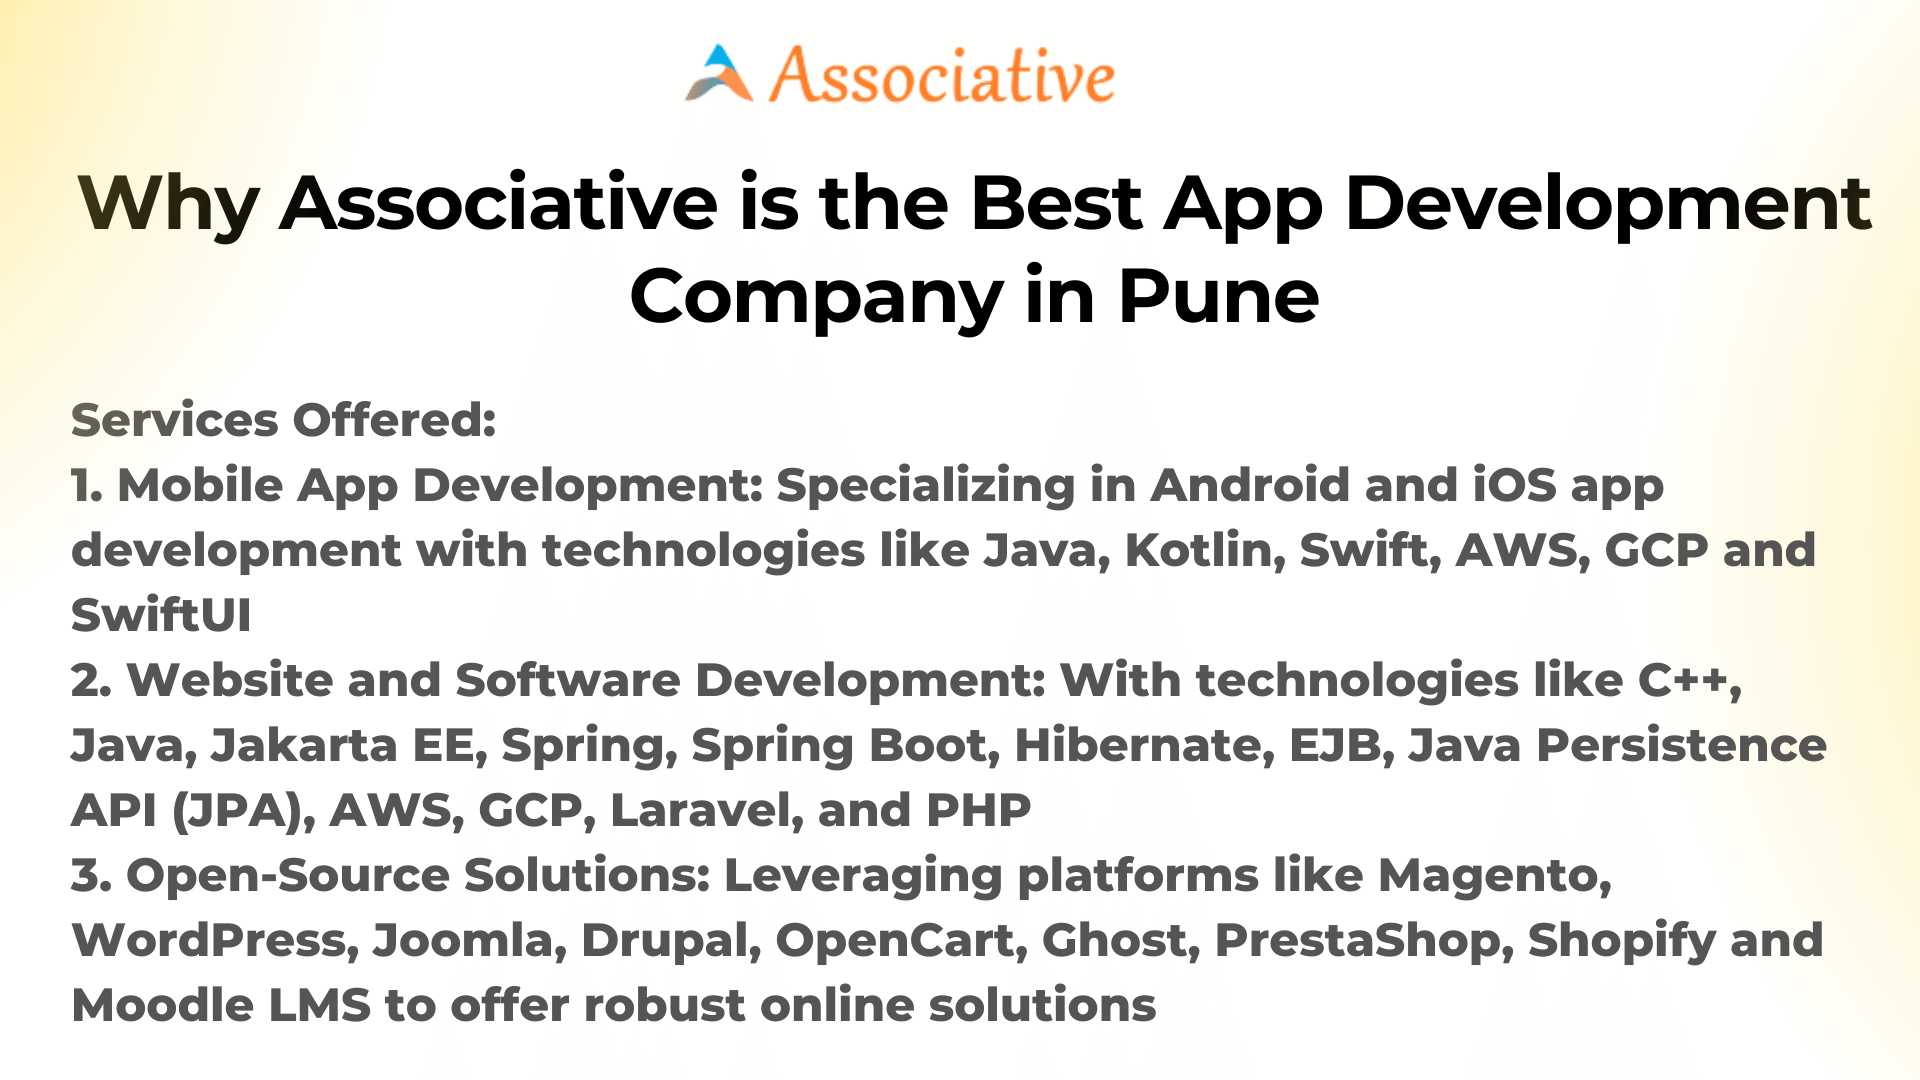 Why Associative is the Best App Development Company in Pune